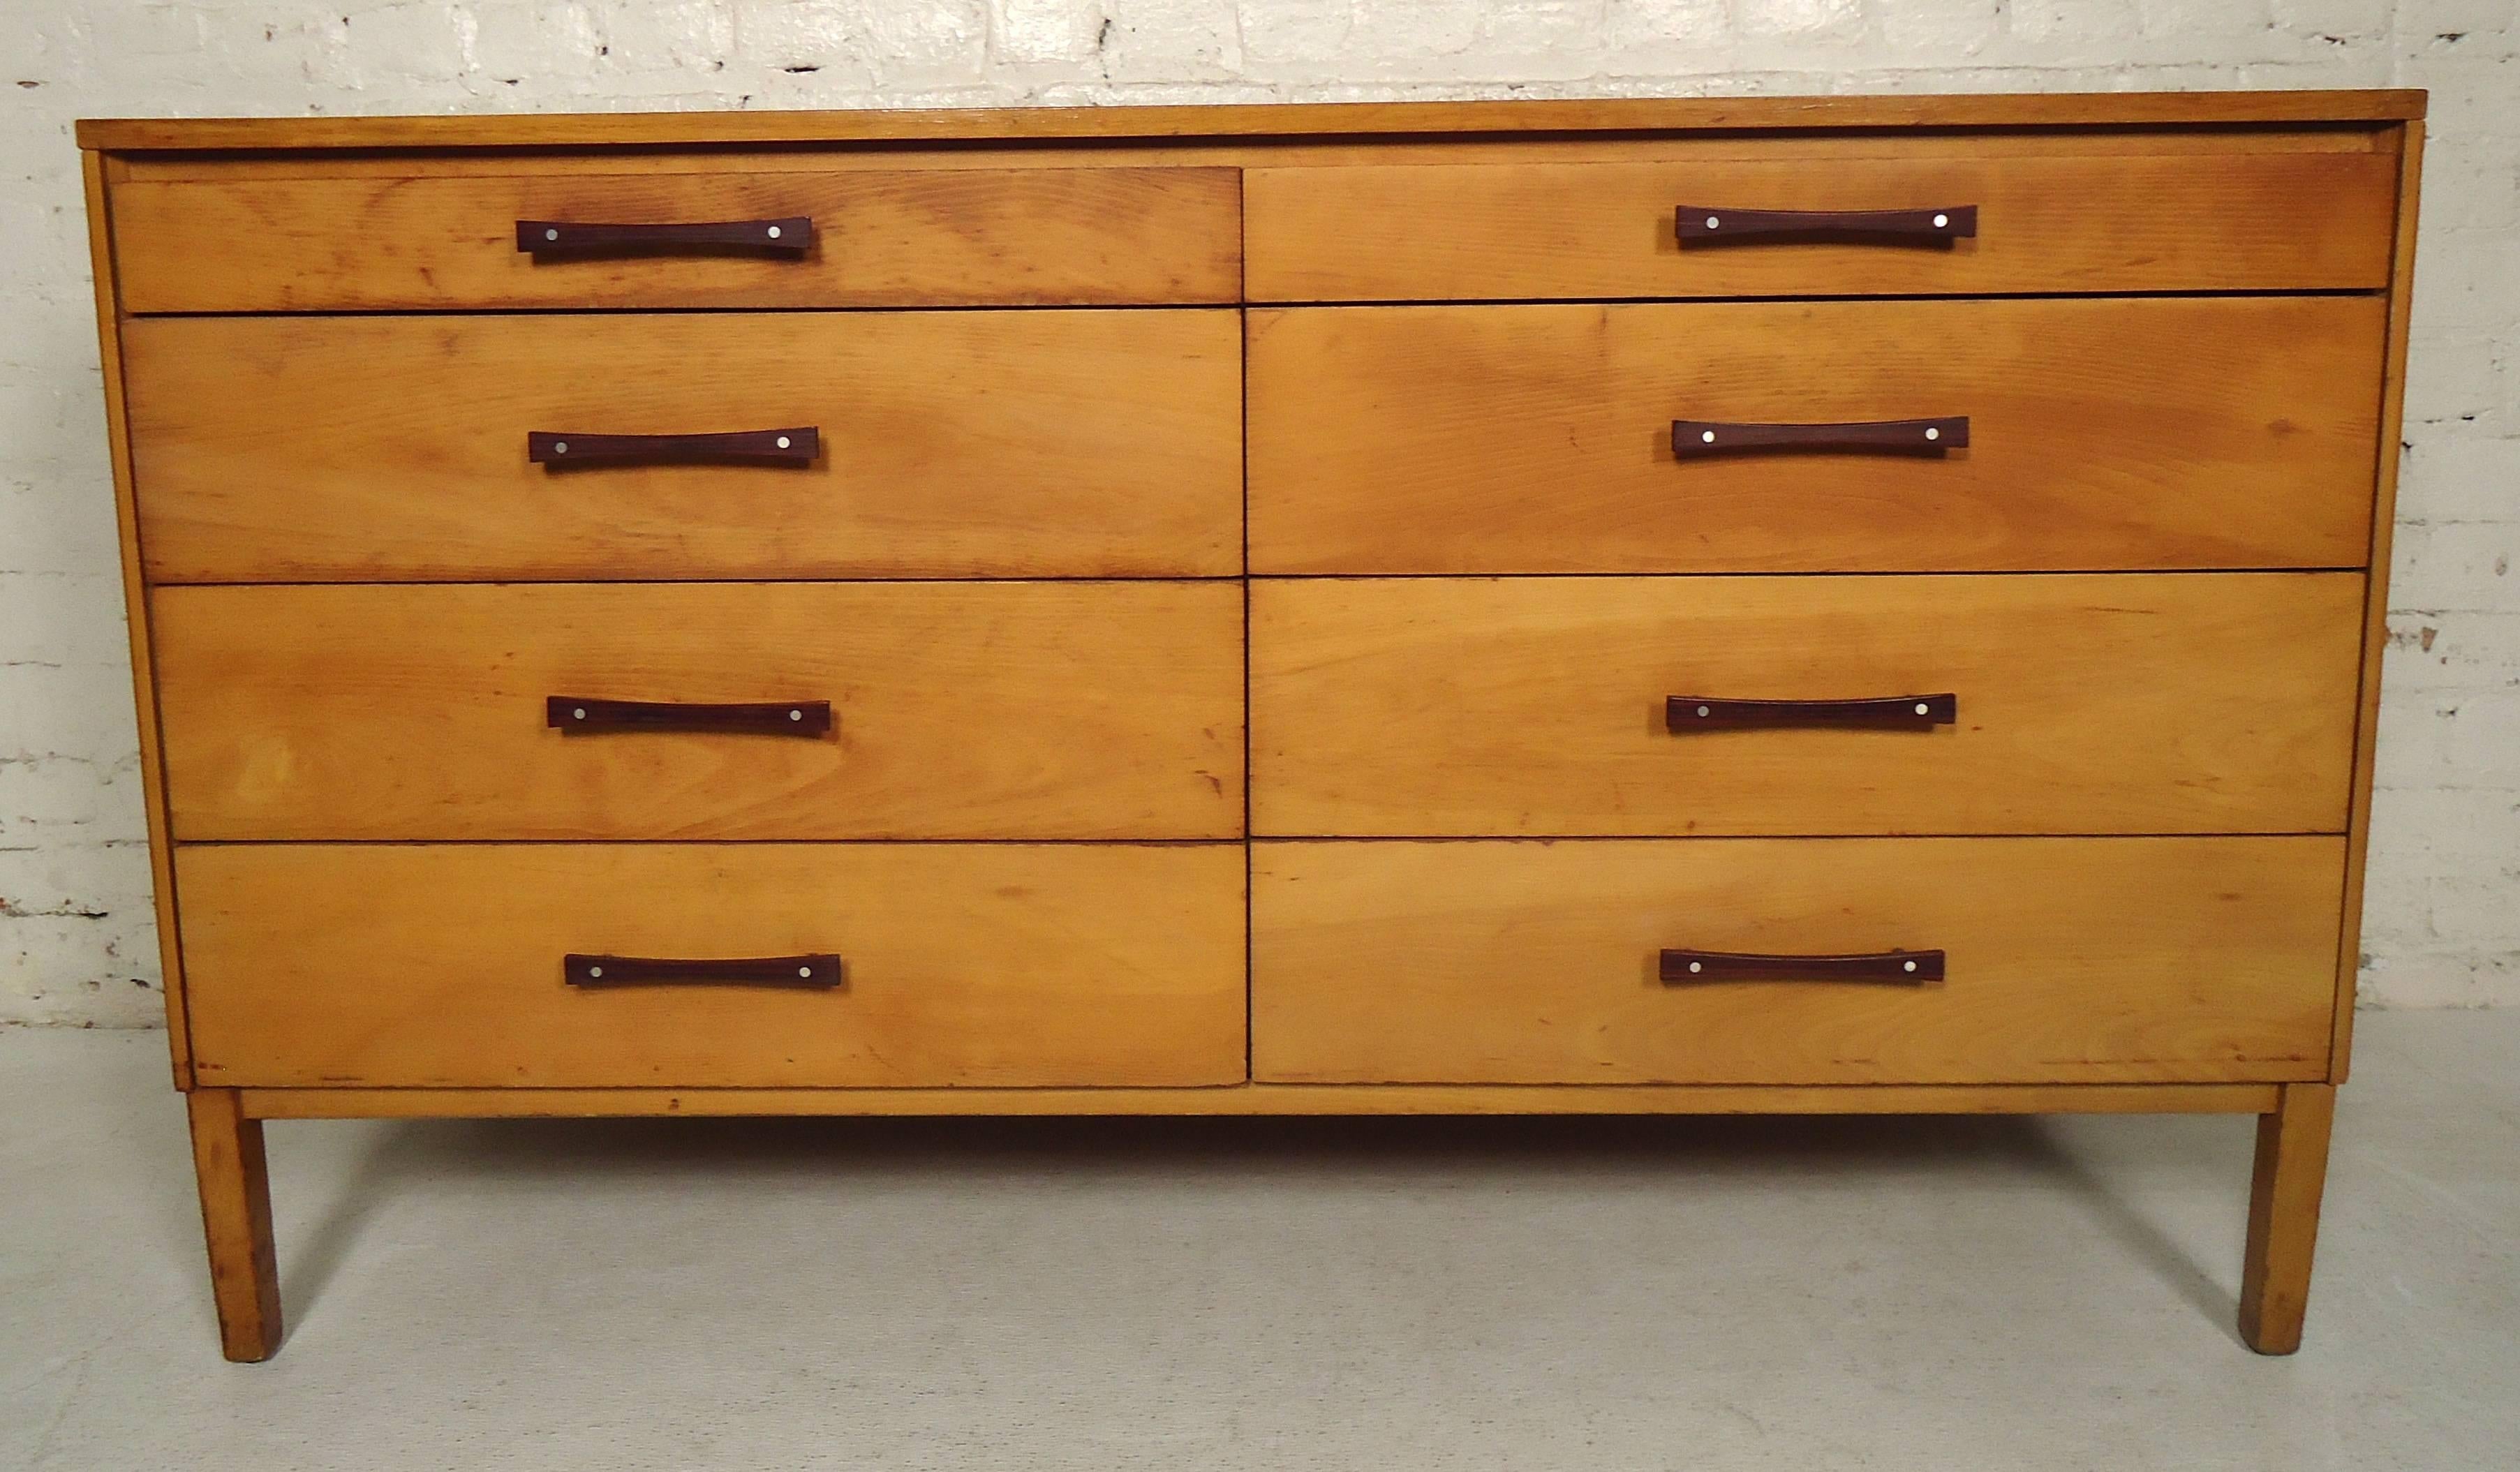 This vintage modern Paul McCobb eight-drawer dresser features graduated drawers with bowtie shaped rosewood and aluminium pulls. The Perimeter Group is a very hard to find and rare line which was manufactured by the Winchendon Furniture Company.